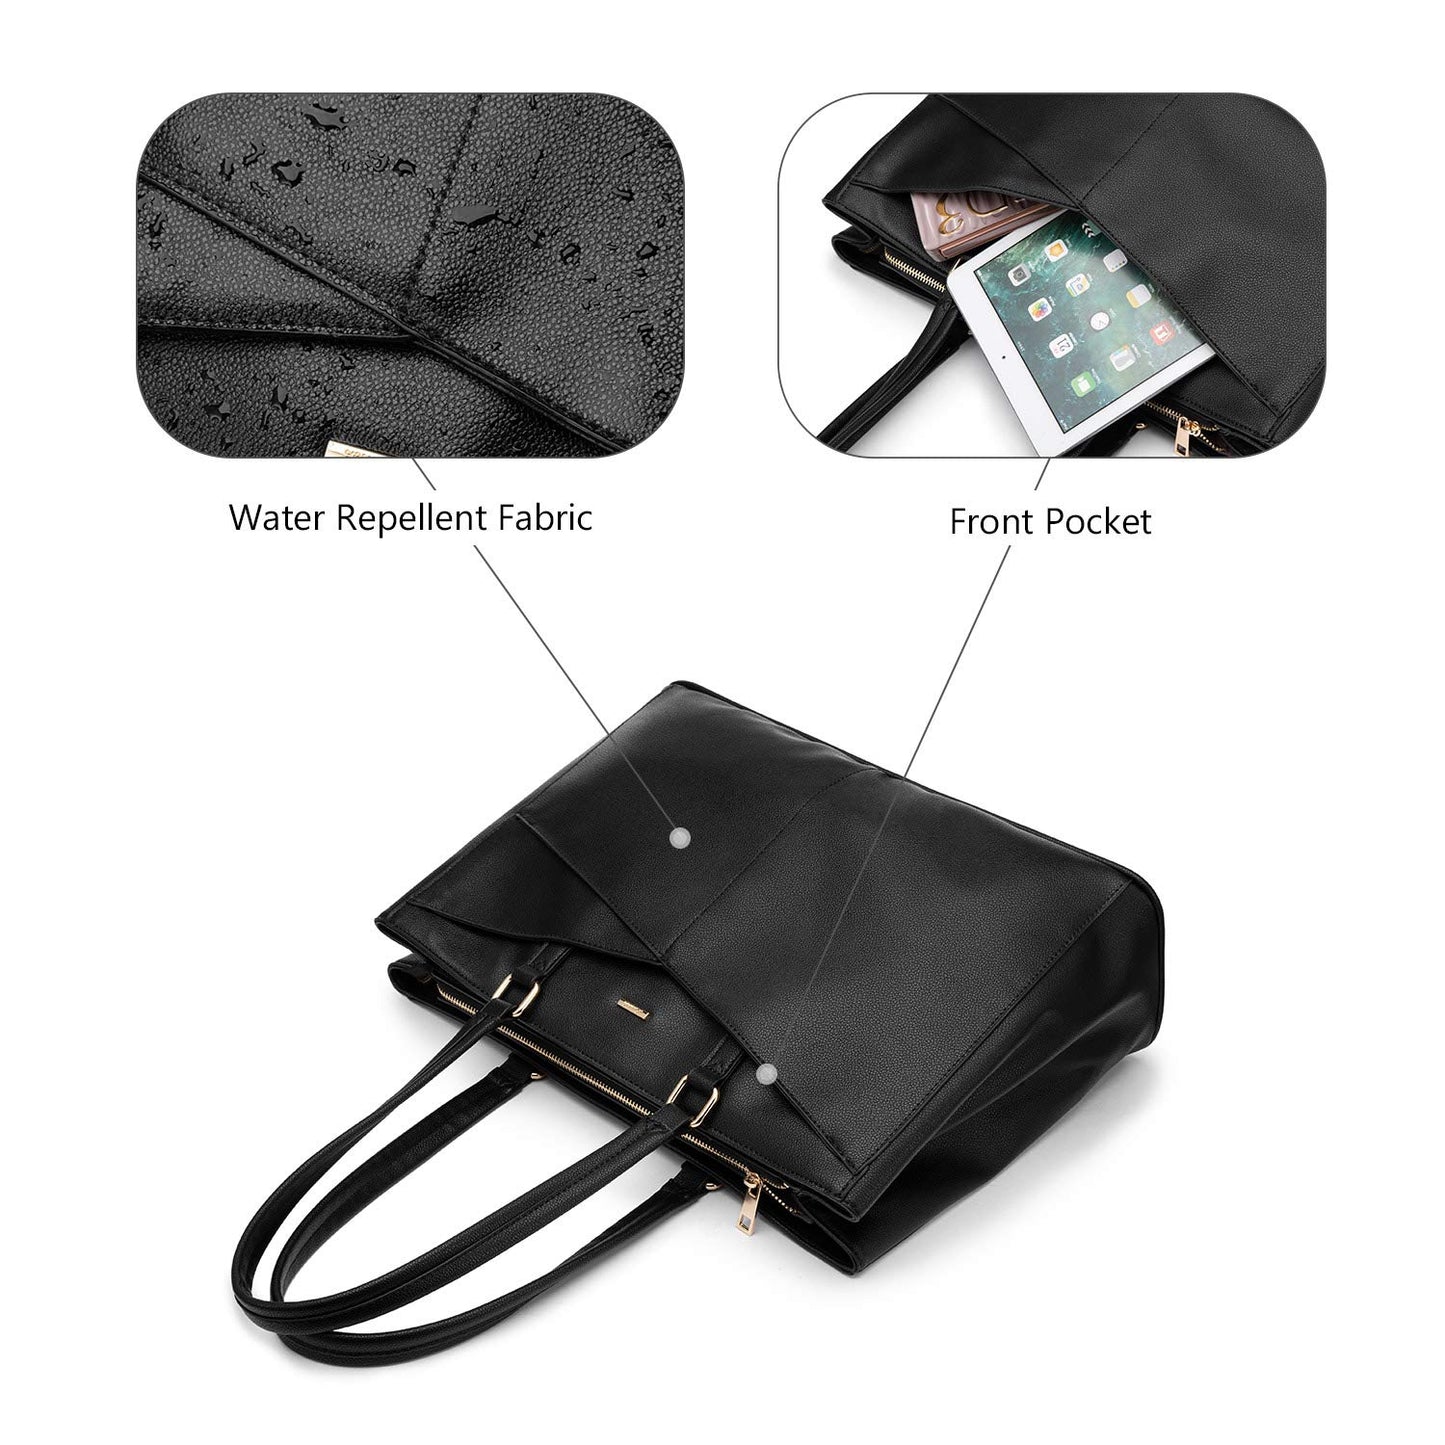 Laptop Tote Bag for Women 15.6 Inch Waterproof Leather Computer Bags Business Office Work Briefcase Black